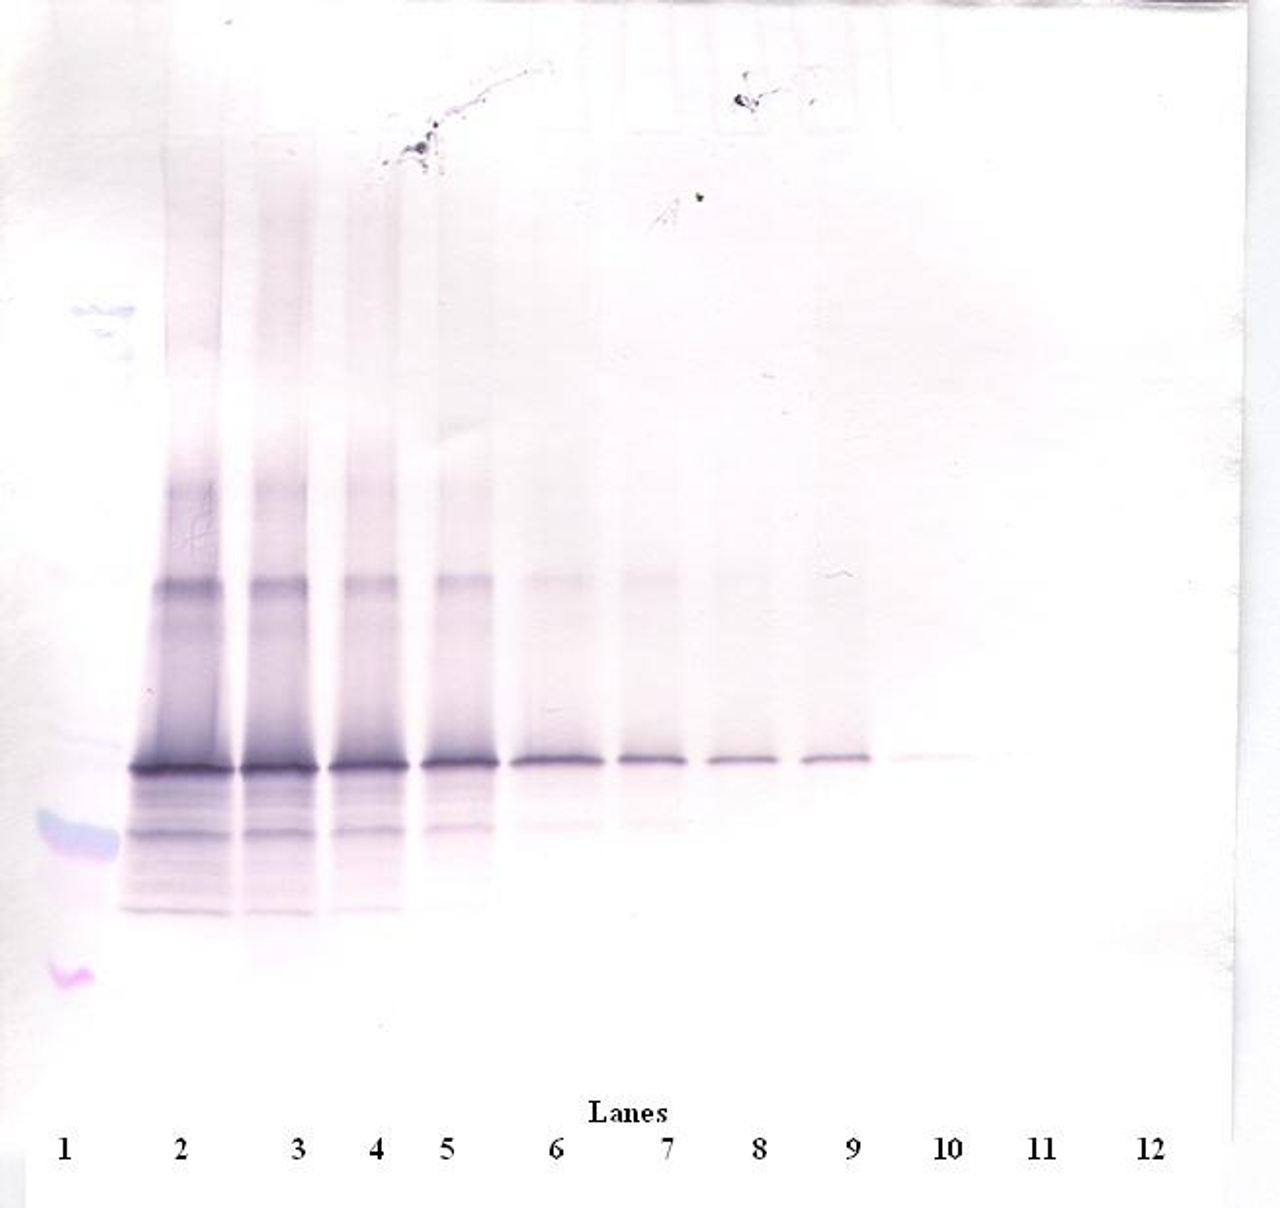 To detect Human Follistatin by Western Blot analysis this antibody can be used at a concentration of 0.1 - 0.2 ug/ml. When used in conjunction with compatible secondary reagents the detection limit for recombinant Human Follistatin is 1.5 - 3.0 ng/lane, under either reducing or non-reducing conditions.